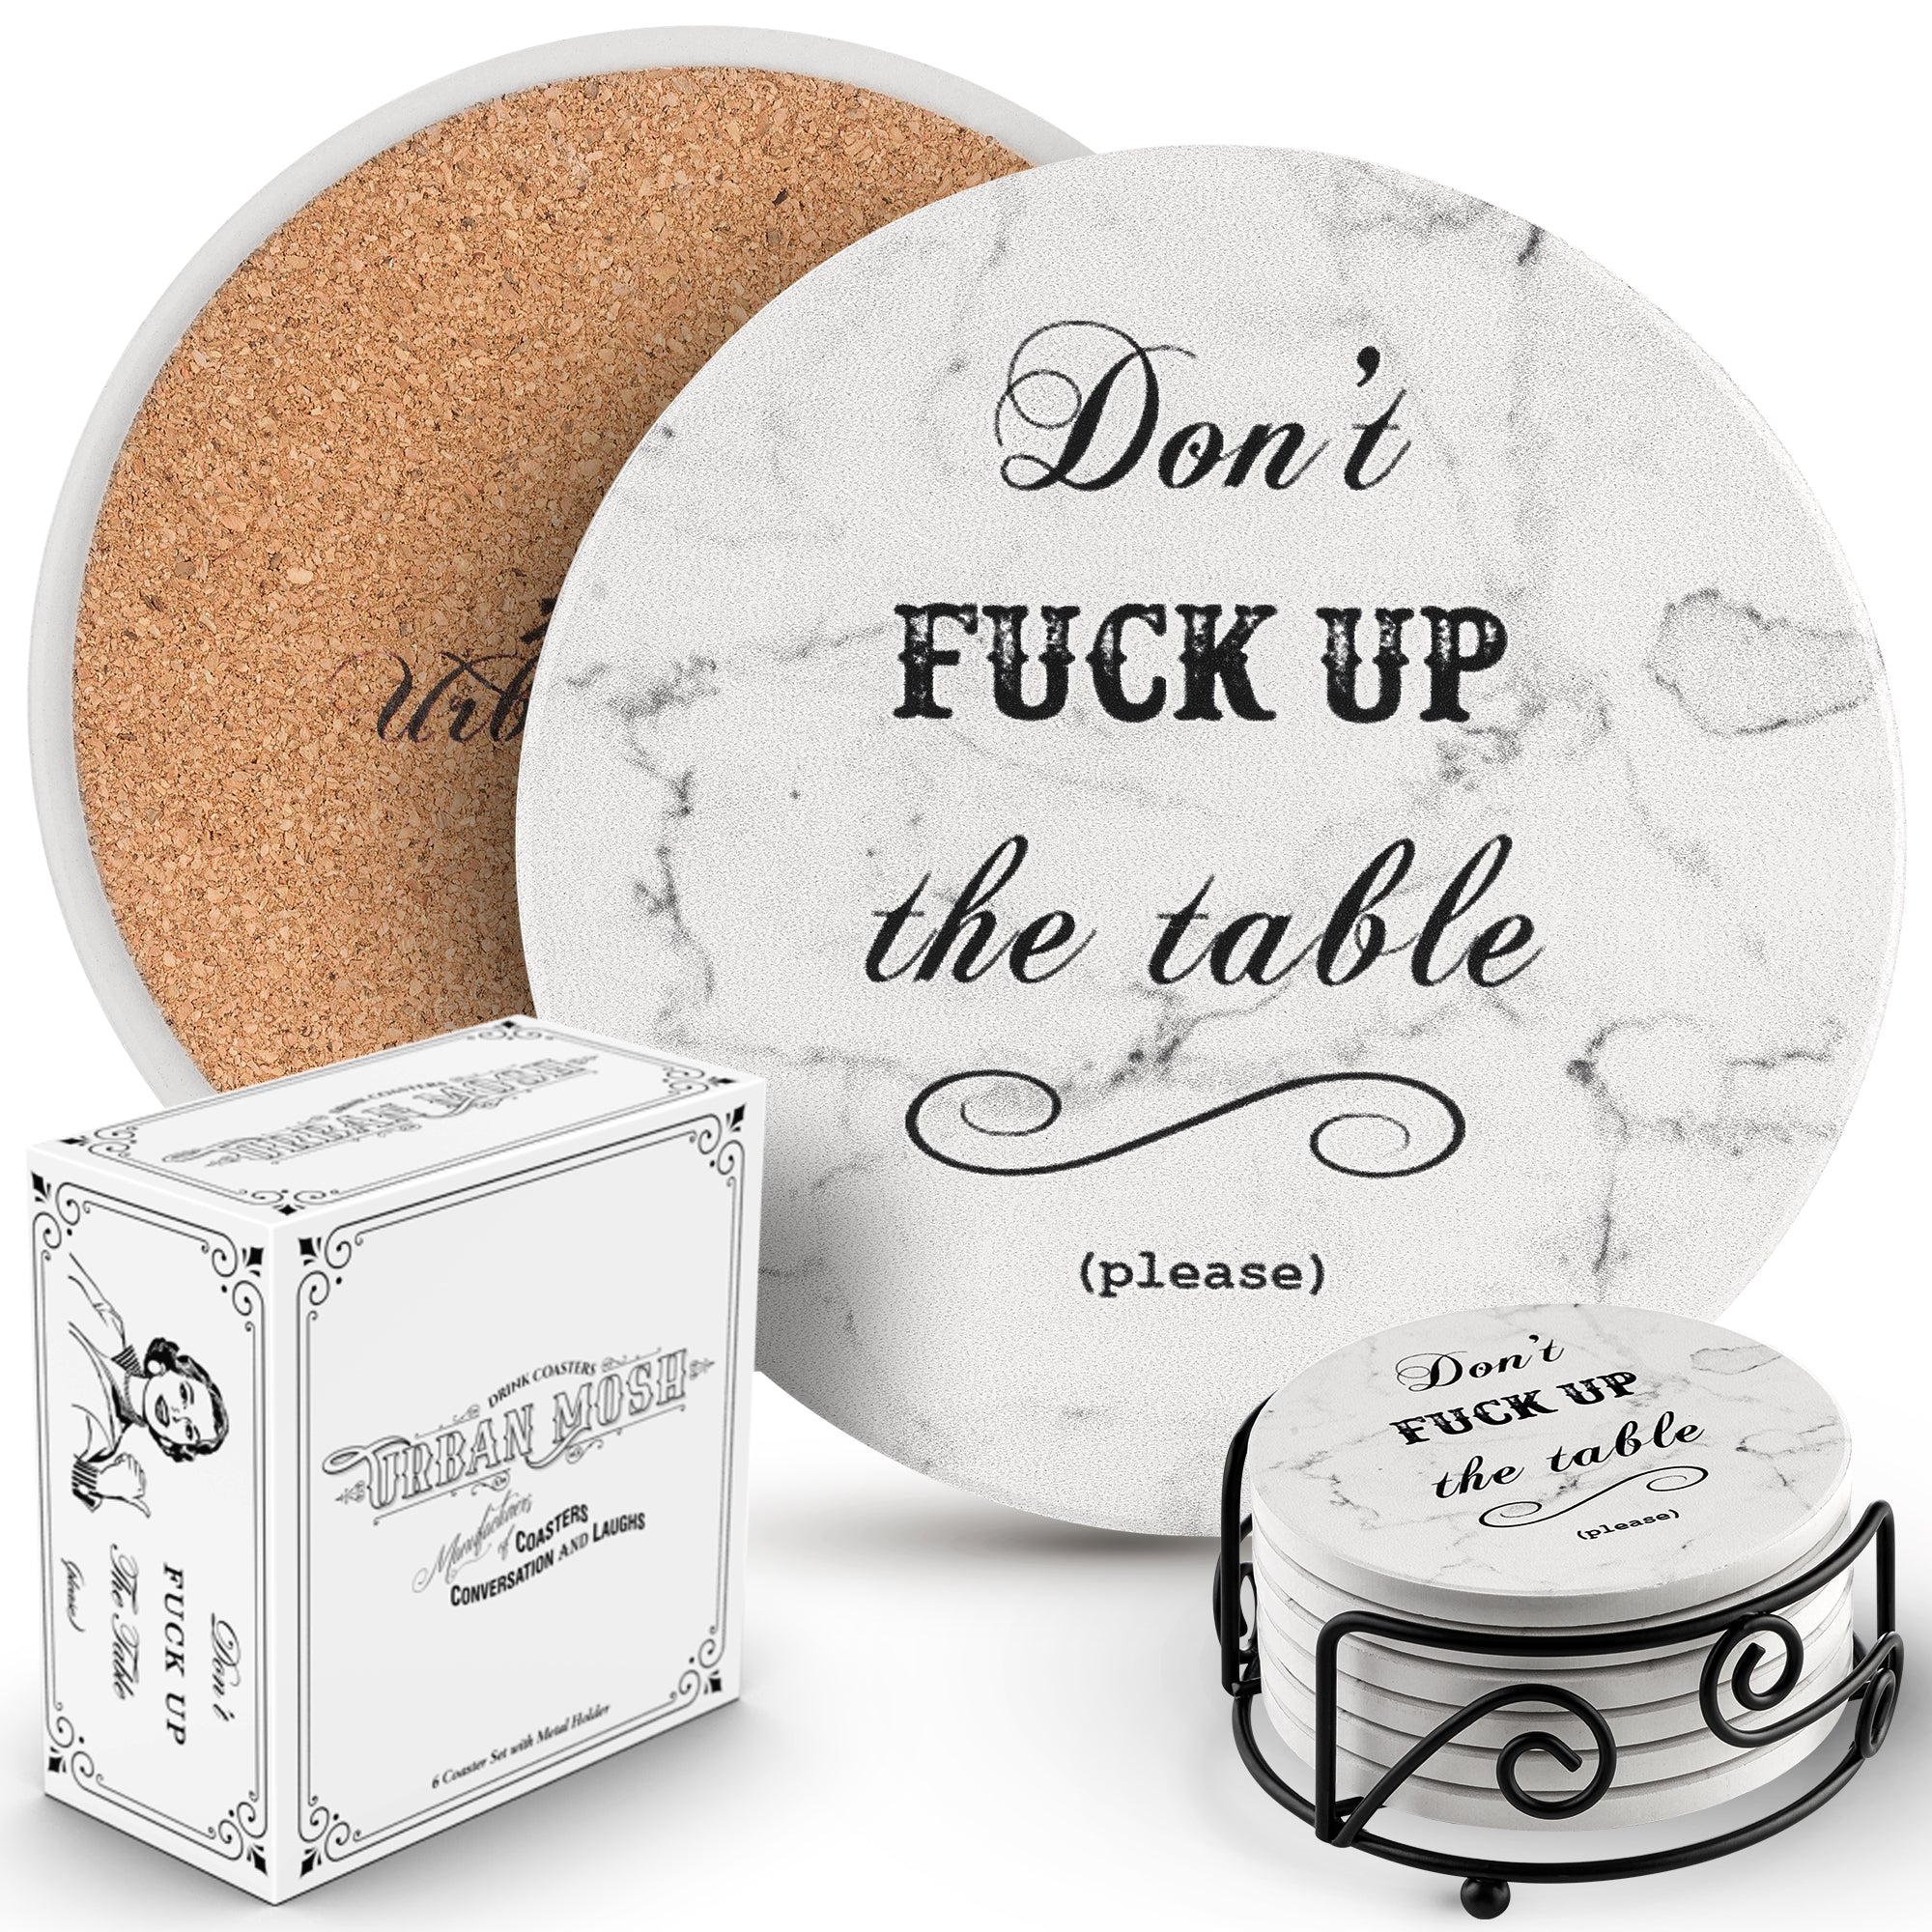 Funny Absorbent Ceramic Drink Coaster Set Don't Fuck Up the Table (pl –  Urban Mosh